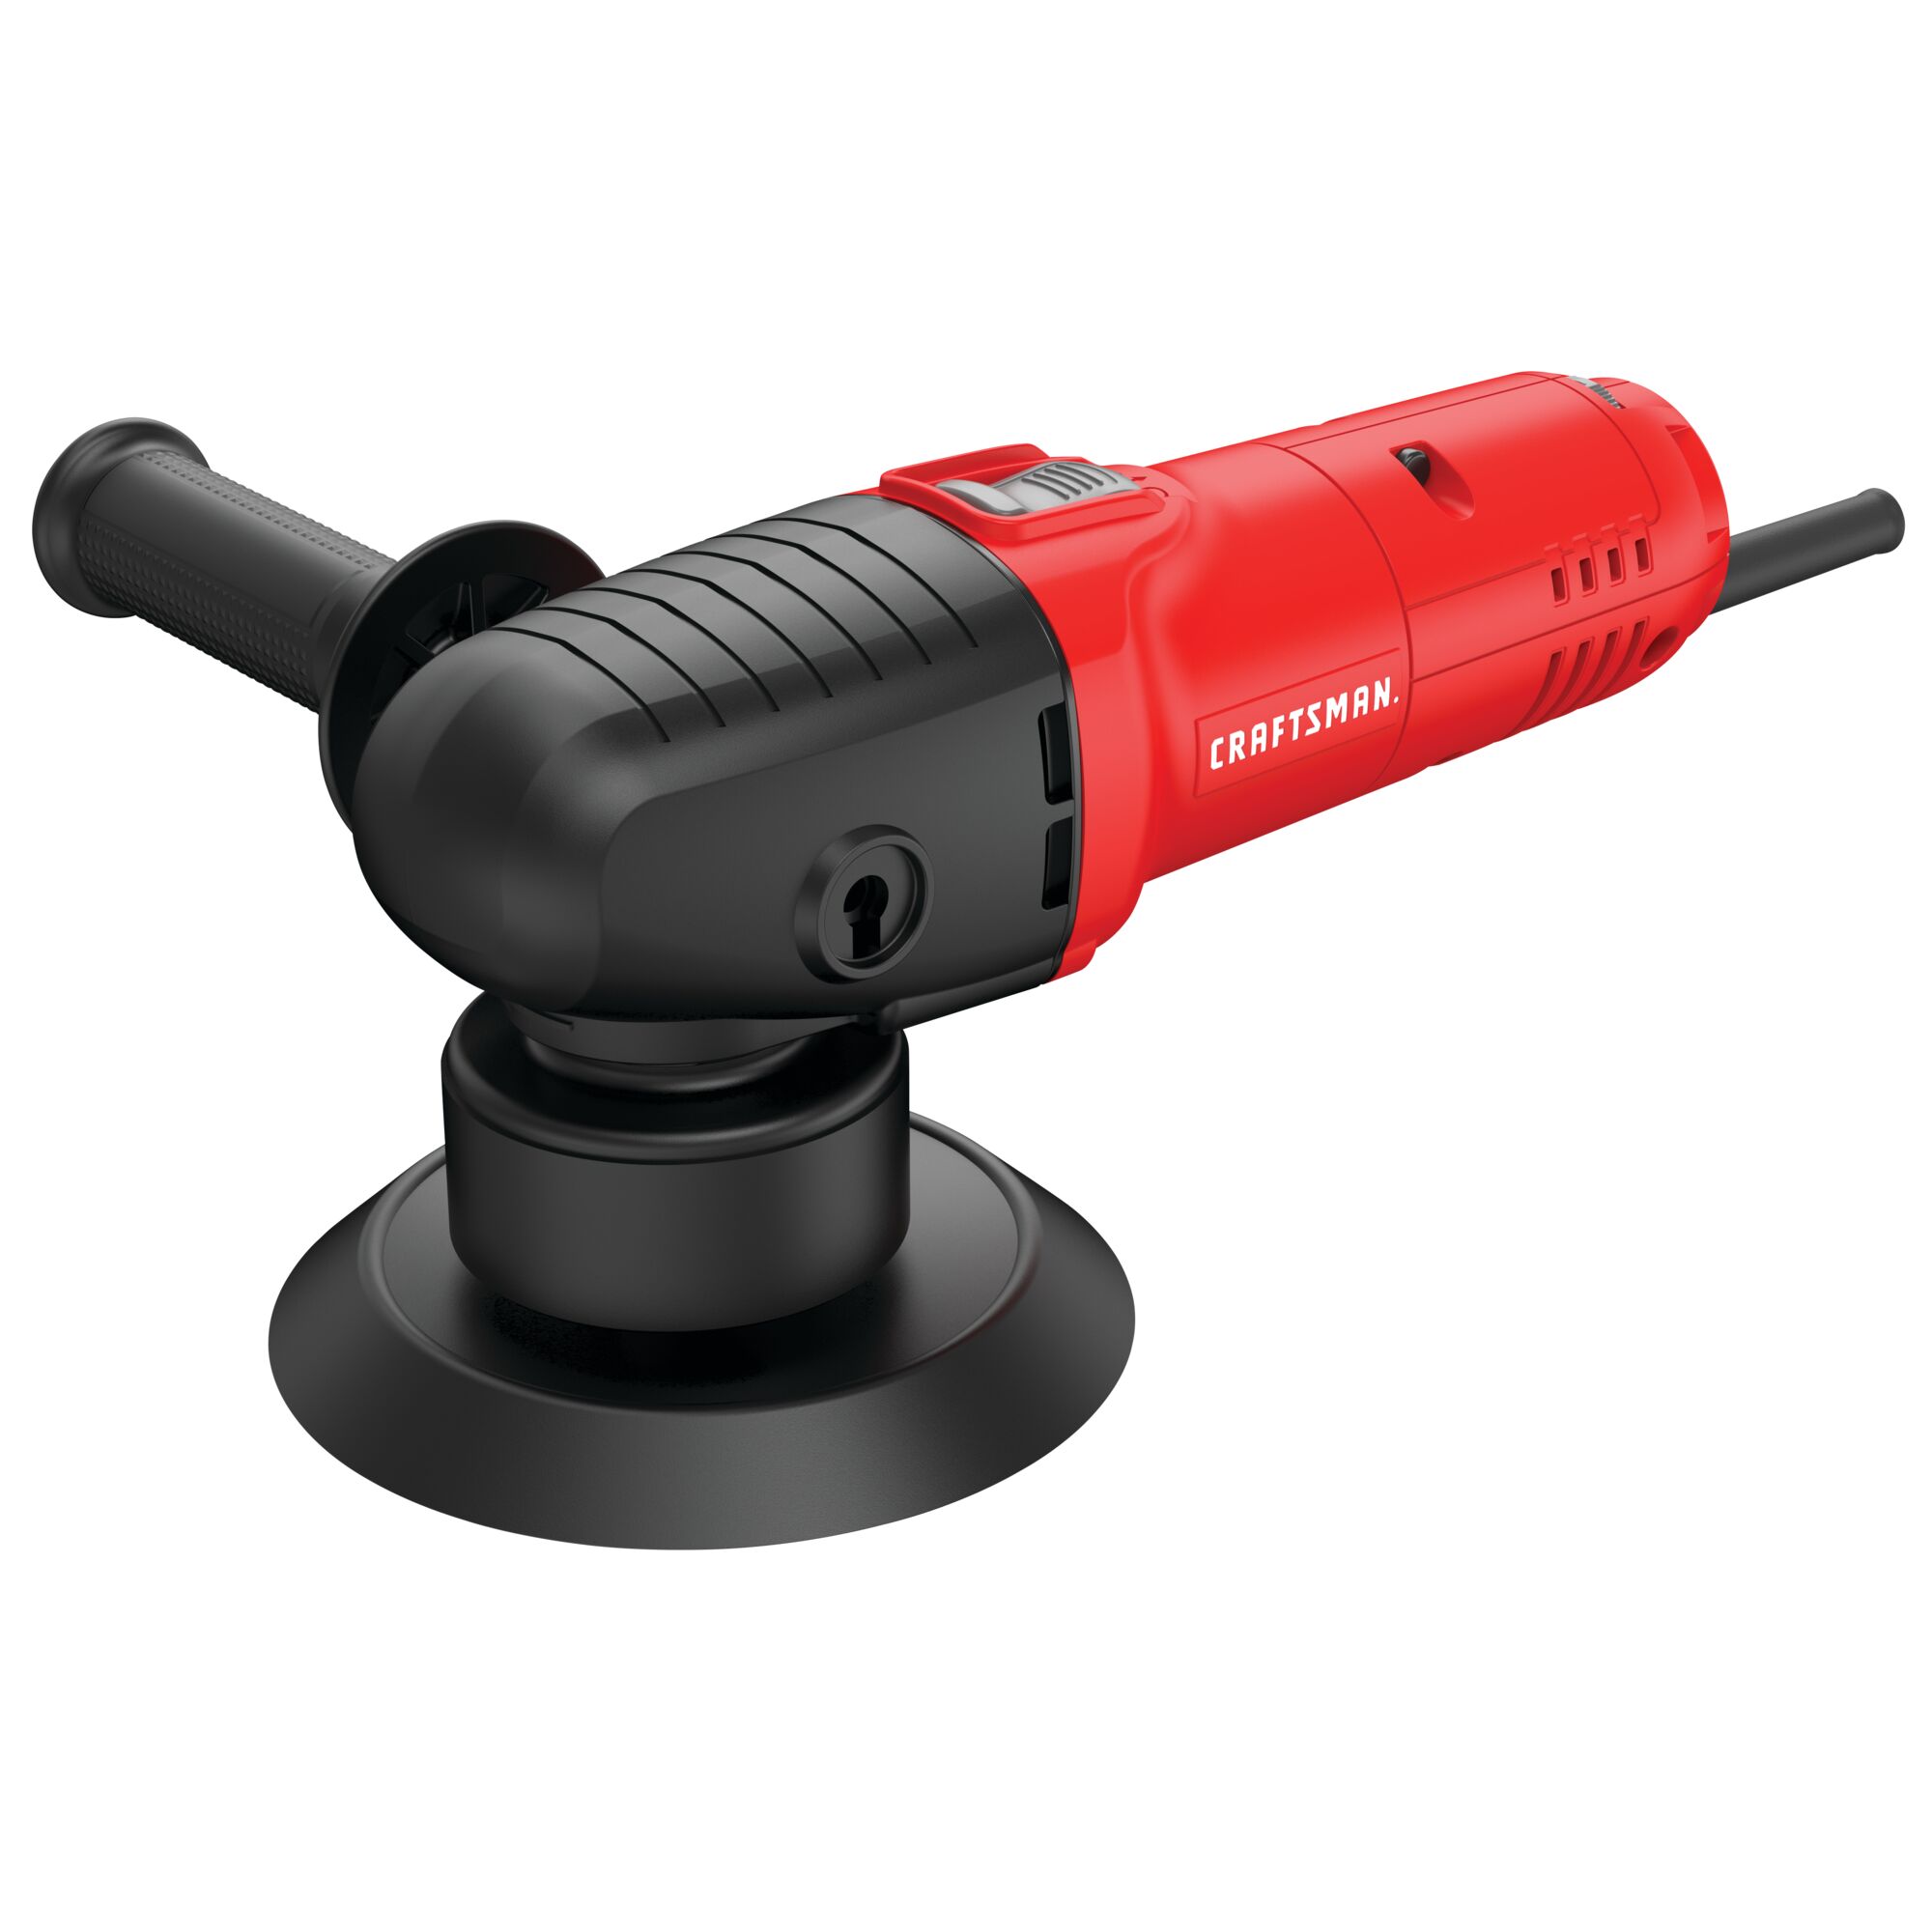 View of CRAFTSMAN Polisher on white background